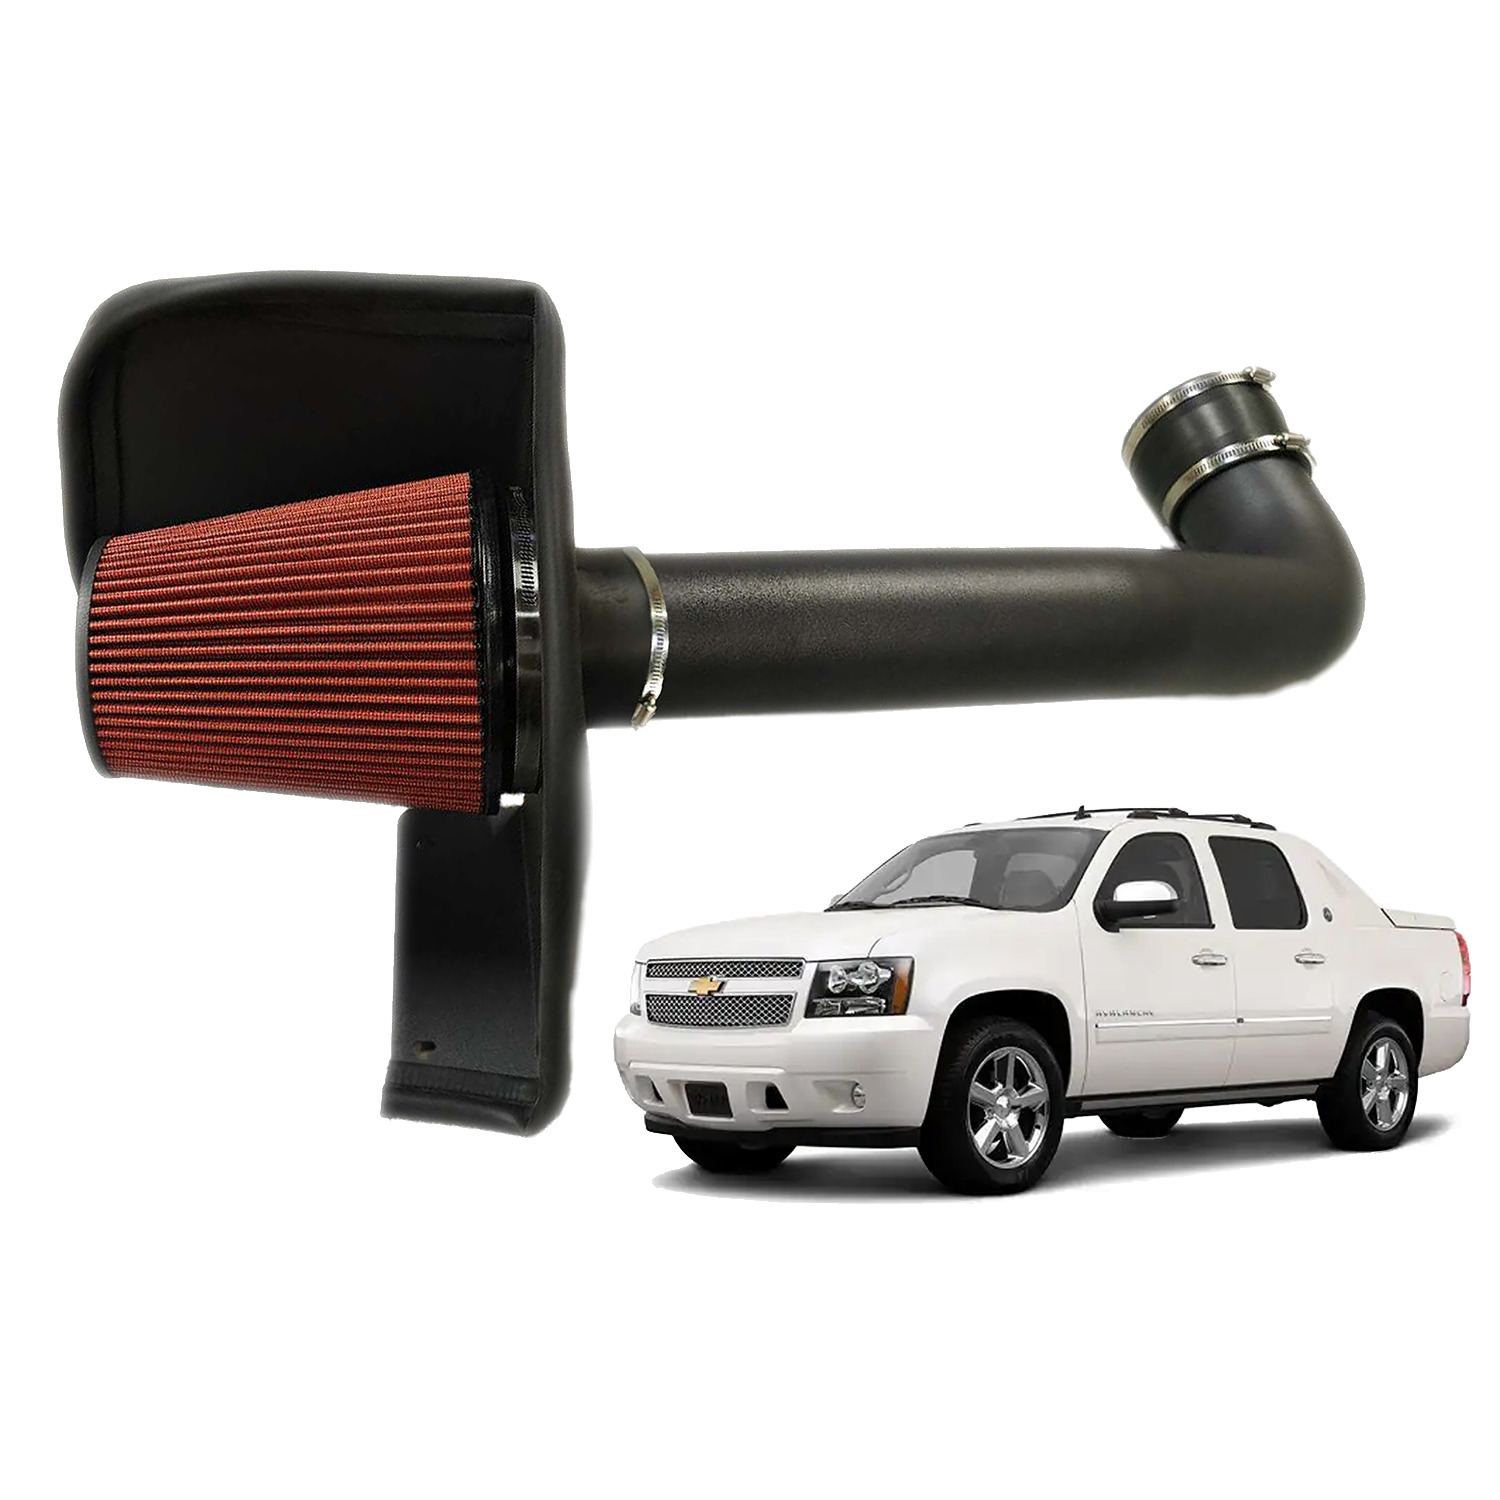 Air Intake + Heat Shield for 2009-2013 Chevrolet Avalanche w/ 5.3L 6.2L V8 Gas